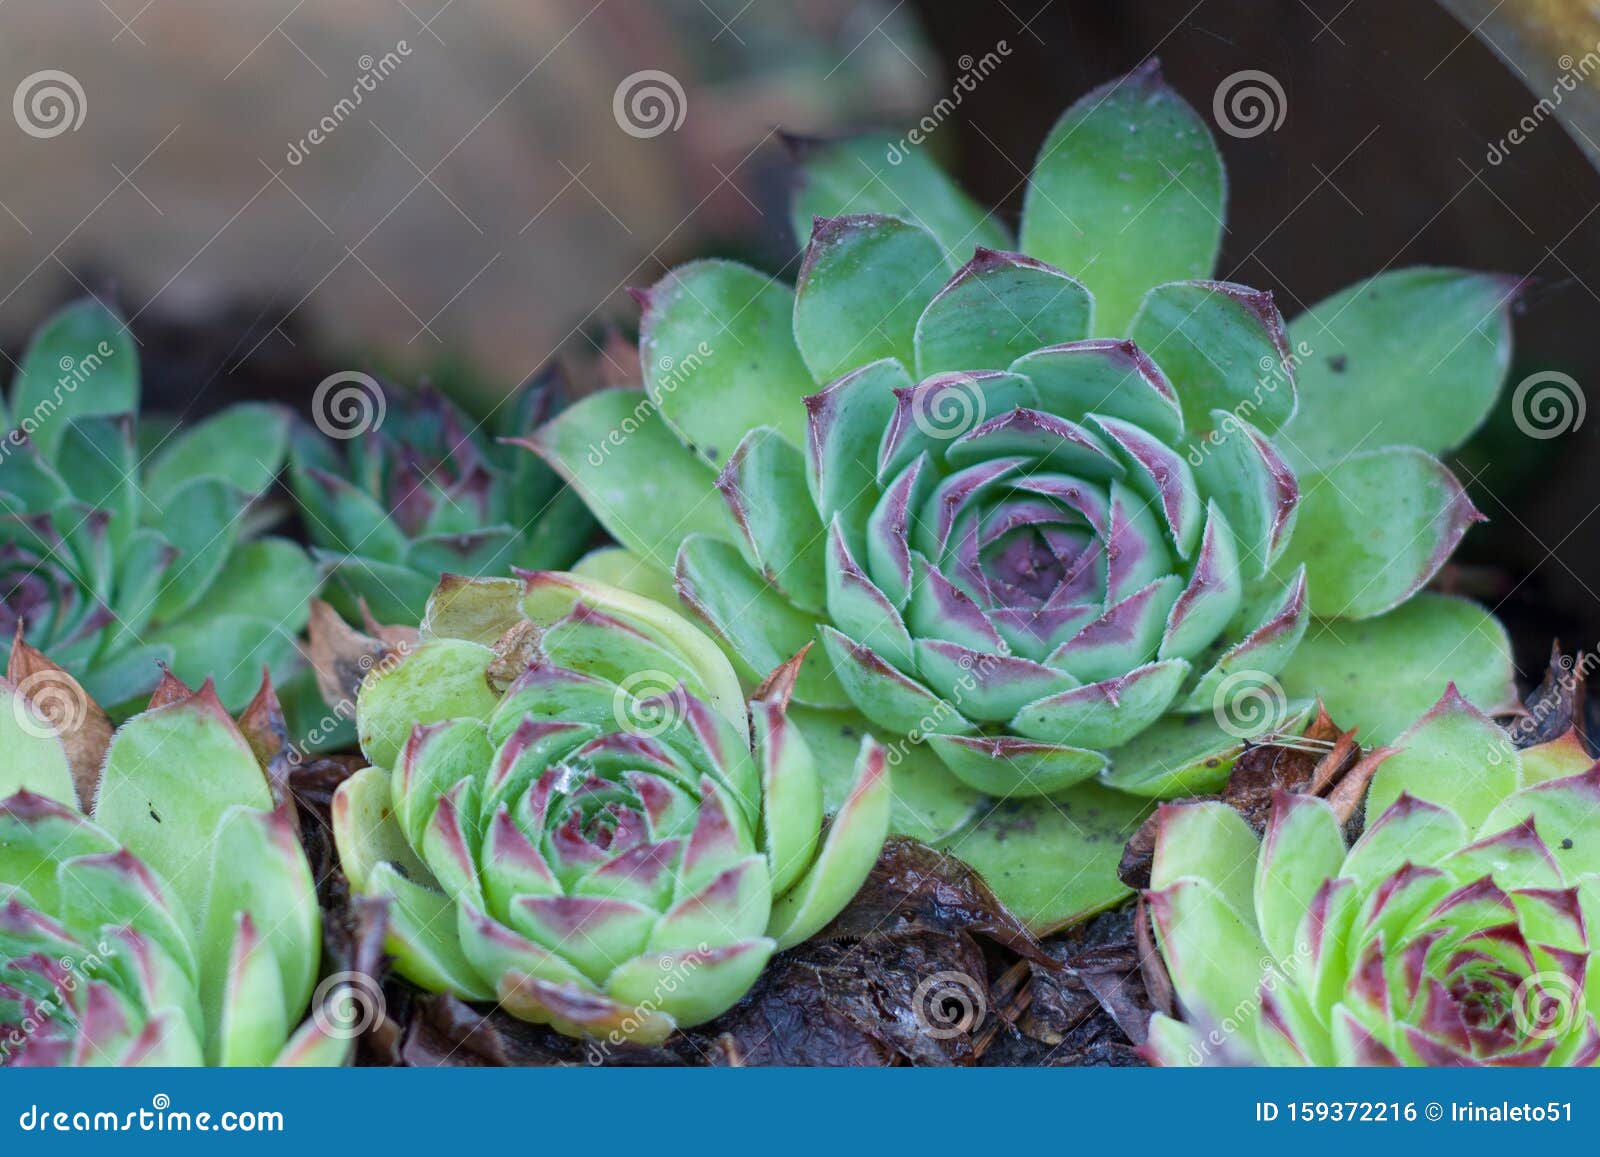 Youngly Stone Rose and Sedum are Succulent Plants of the Family ...